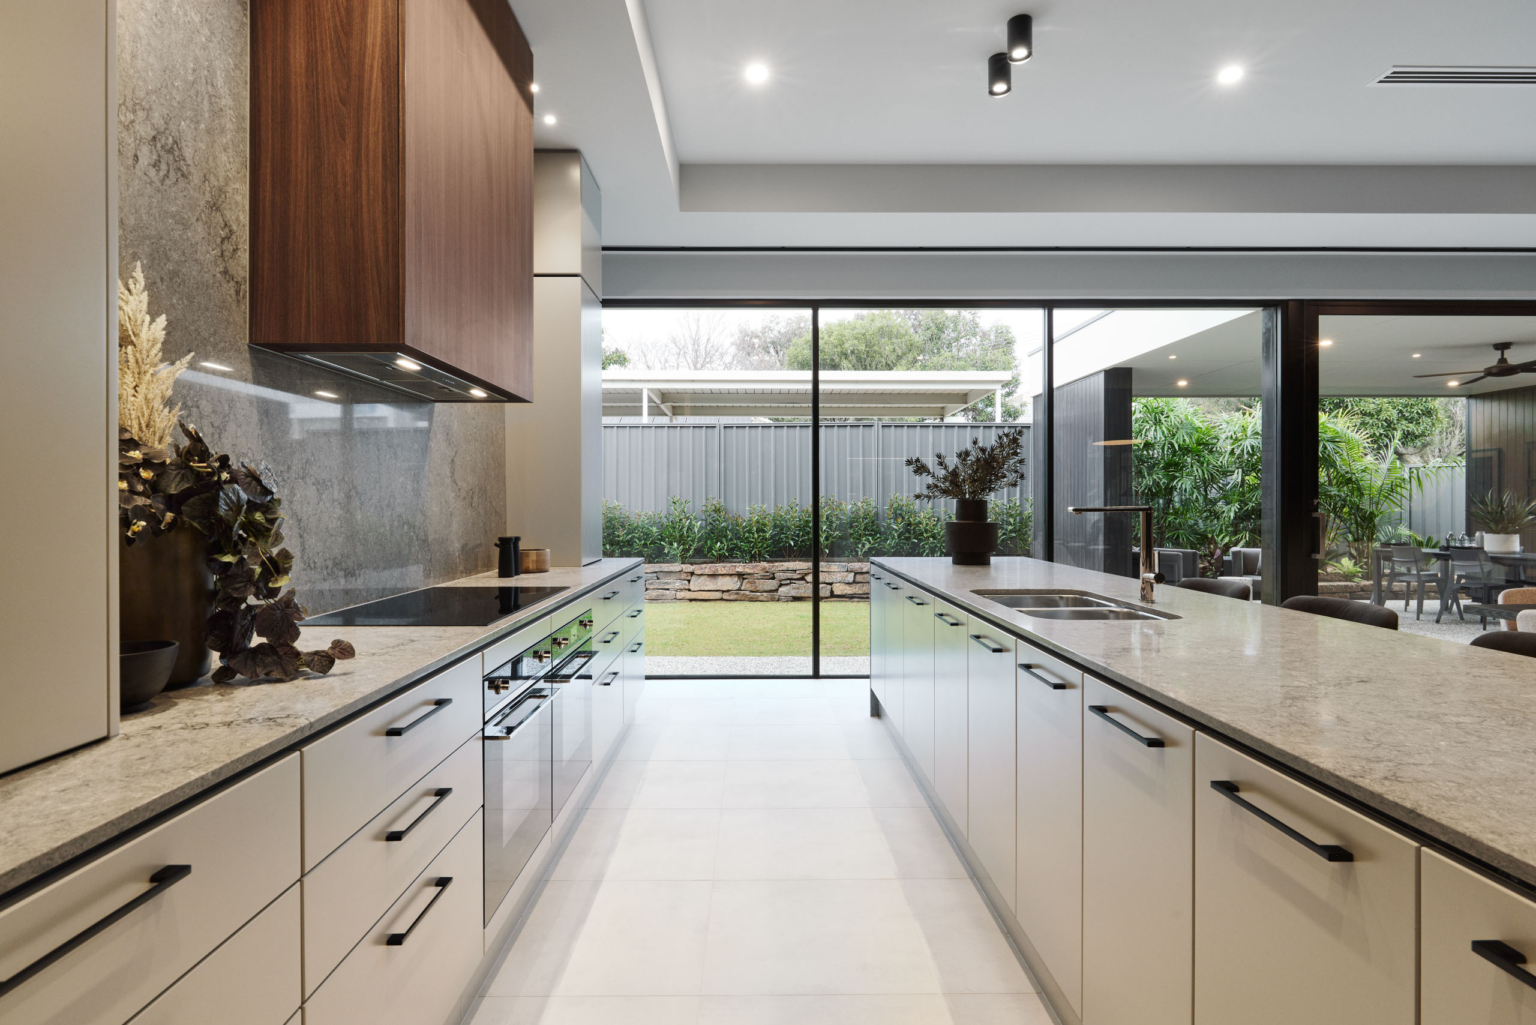 Gallery - Farquhar Kitchens